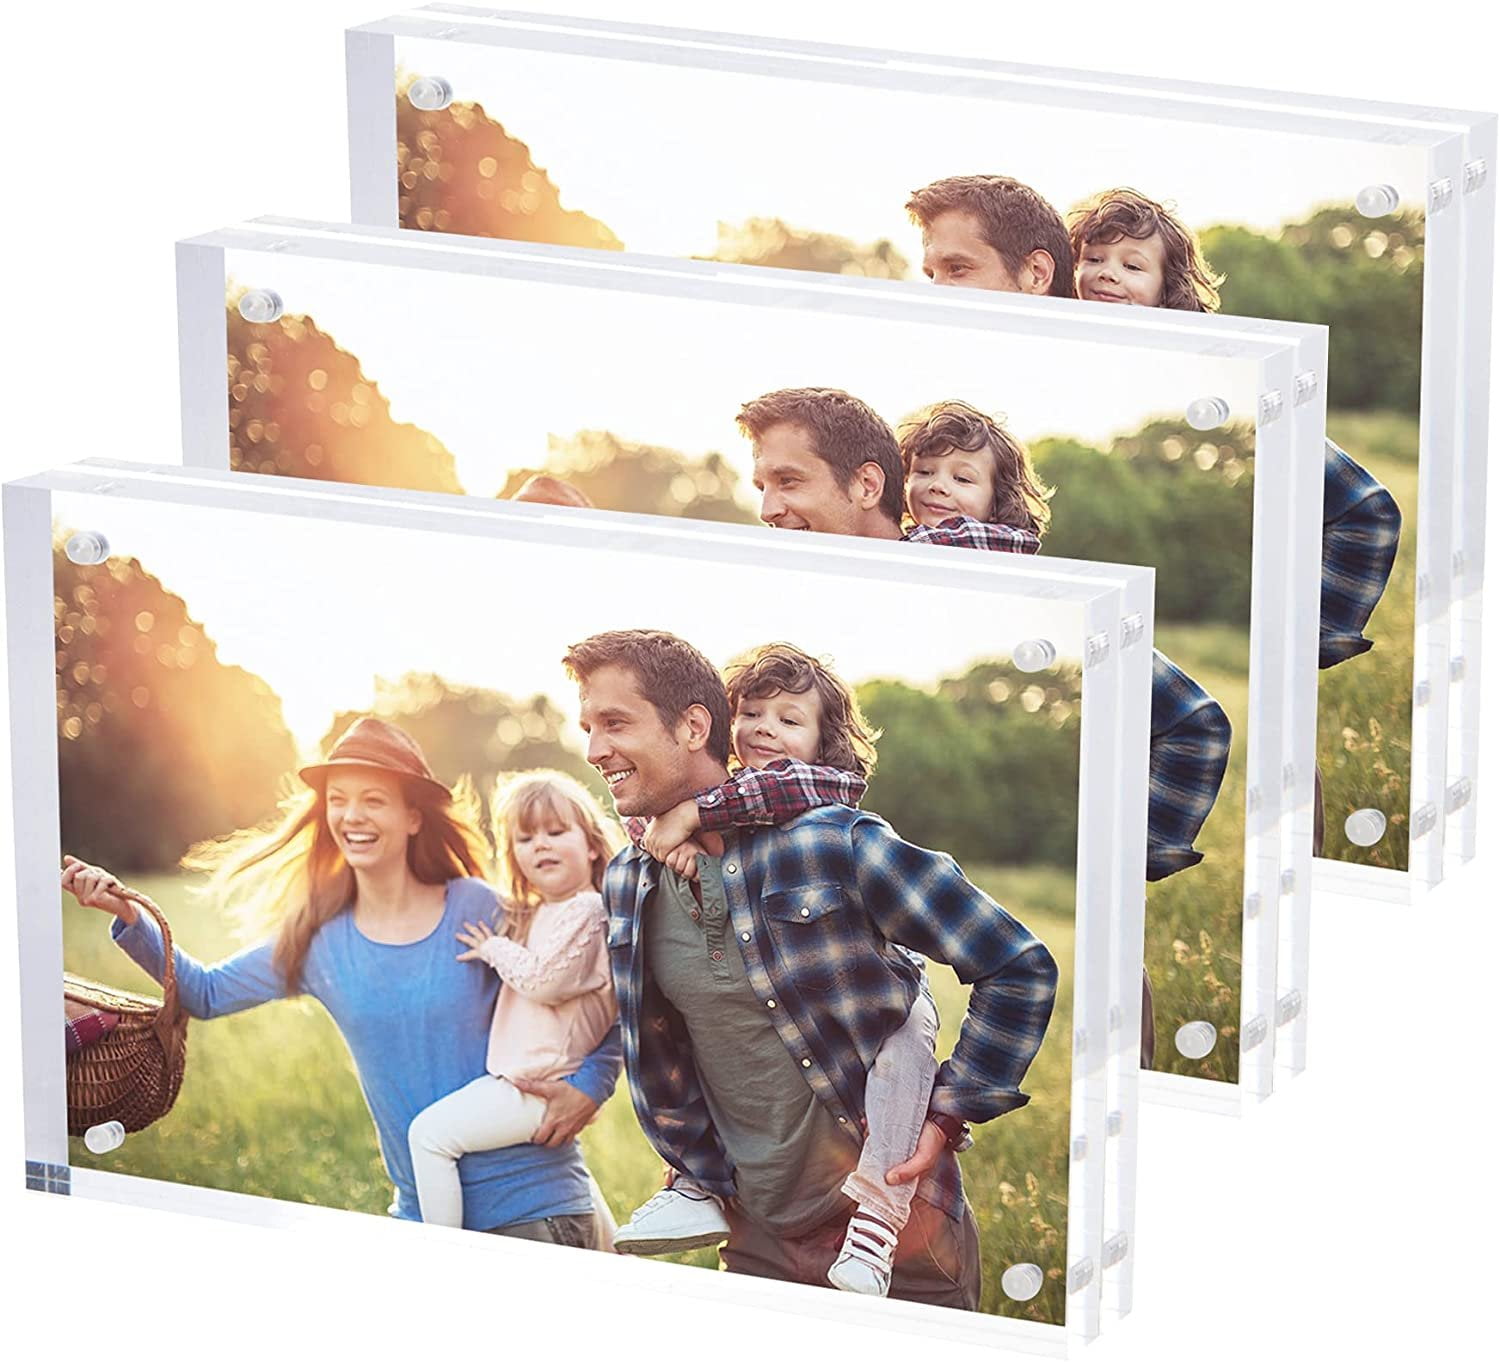 Adventa Mixtile 4 Pack, Collage Photo Frames, Custom Wall Gallery Display,  Lightweight Removeable and Repositionable without leaving residue - 20x20